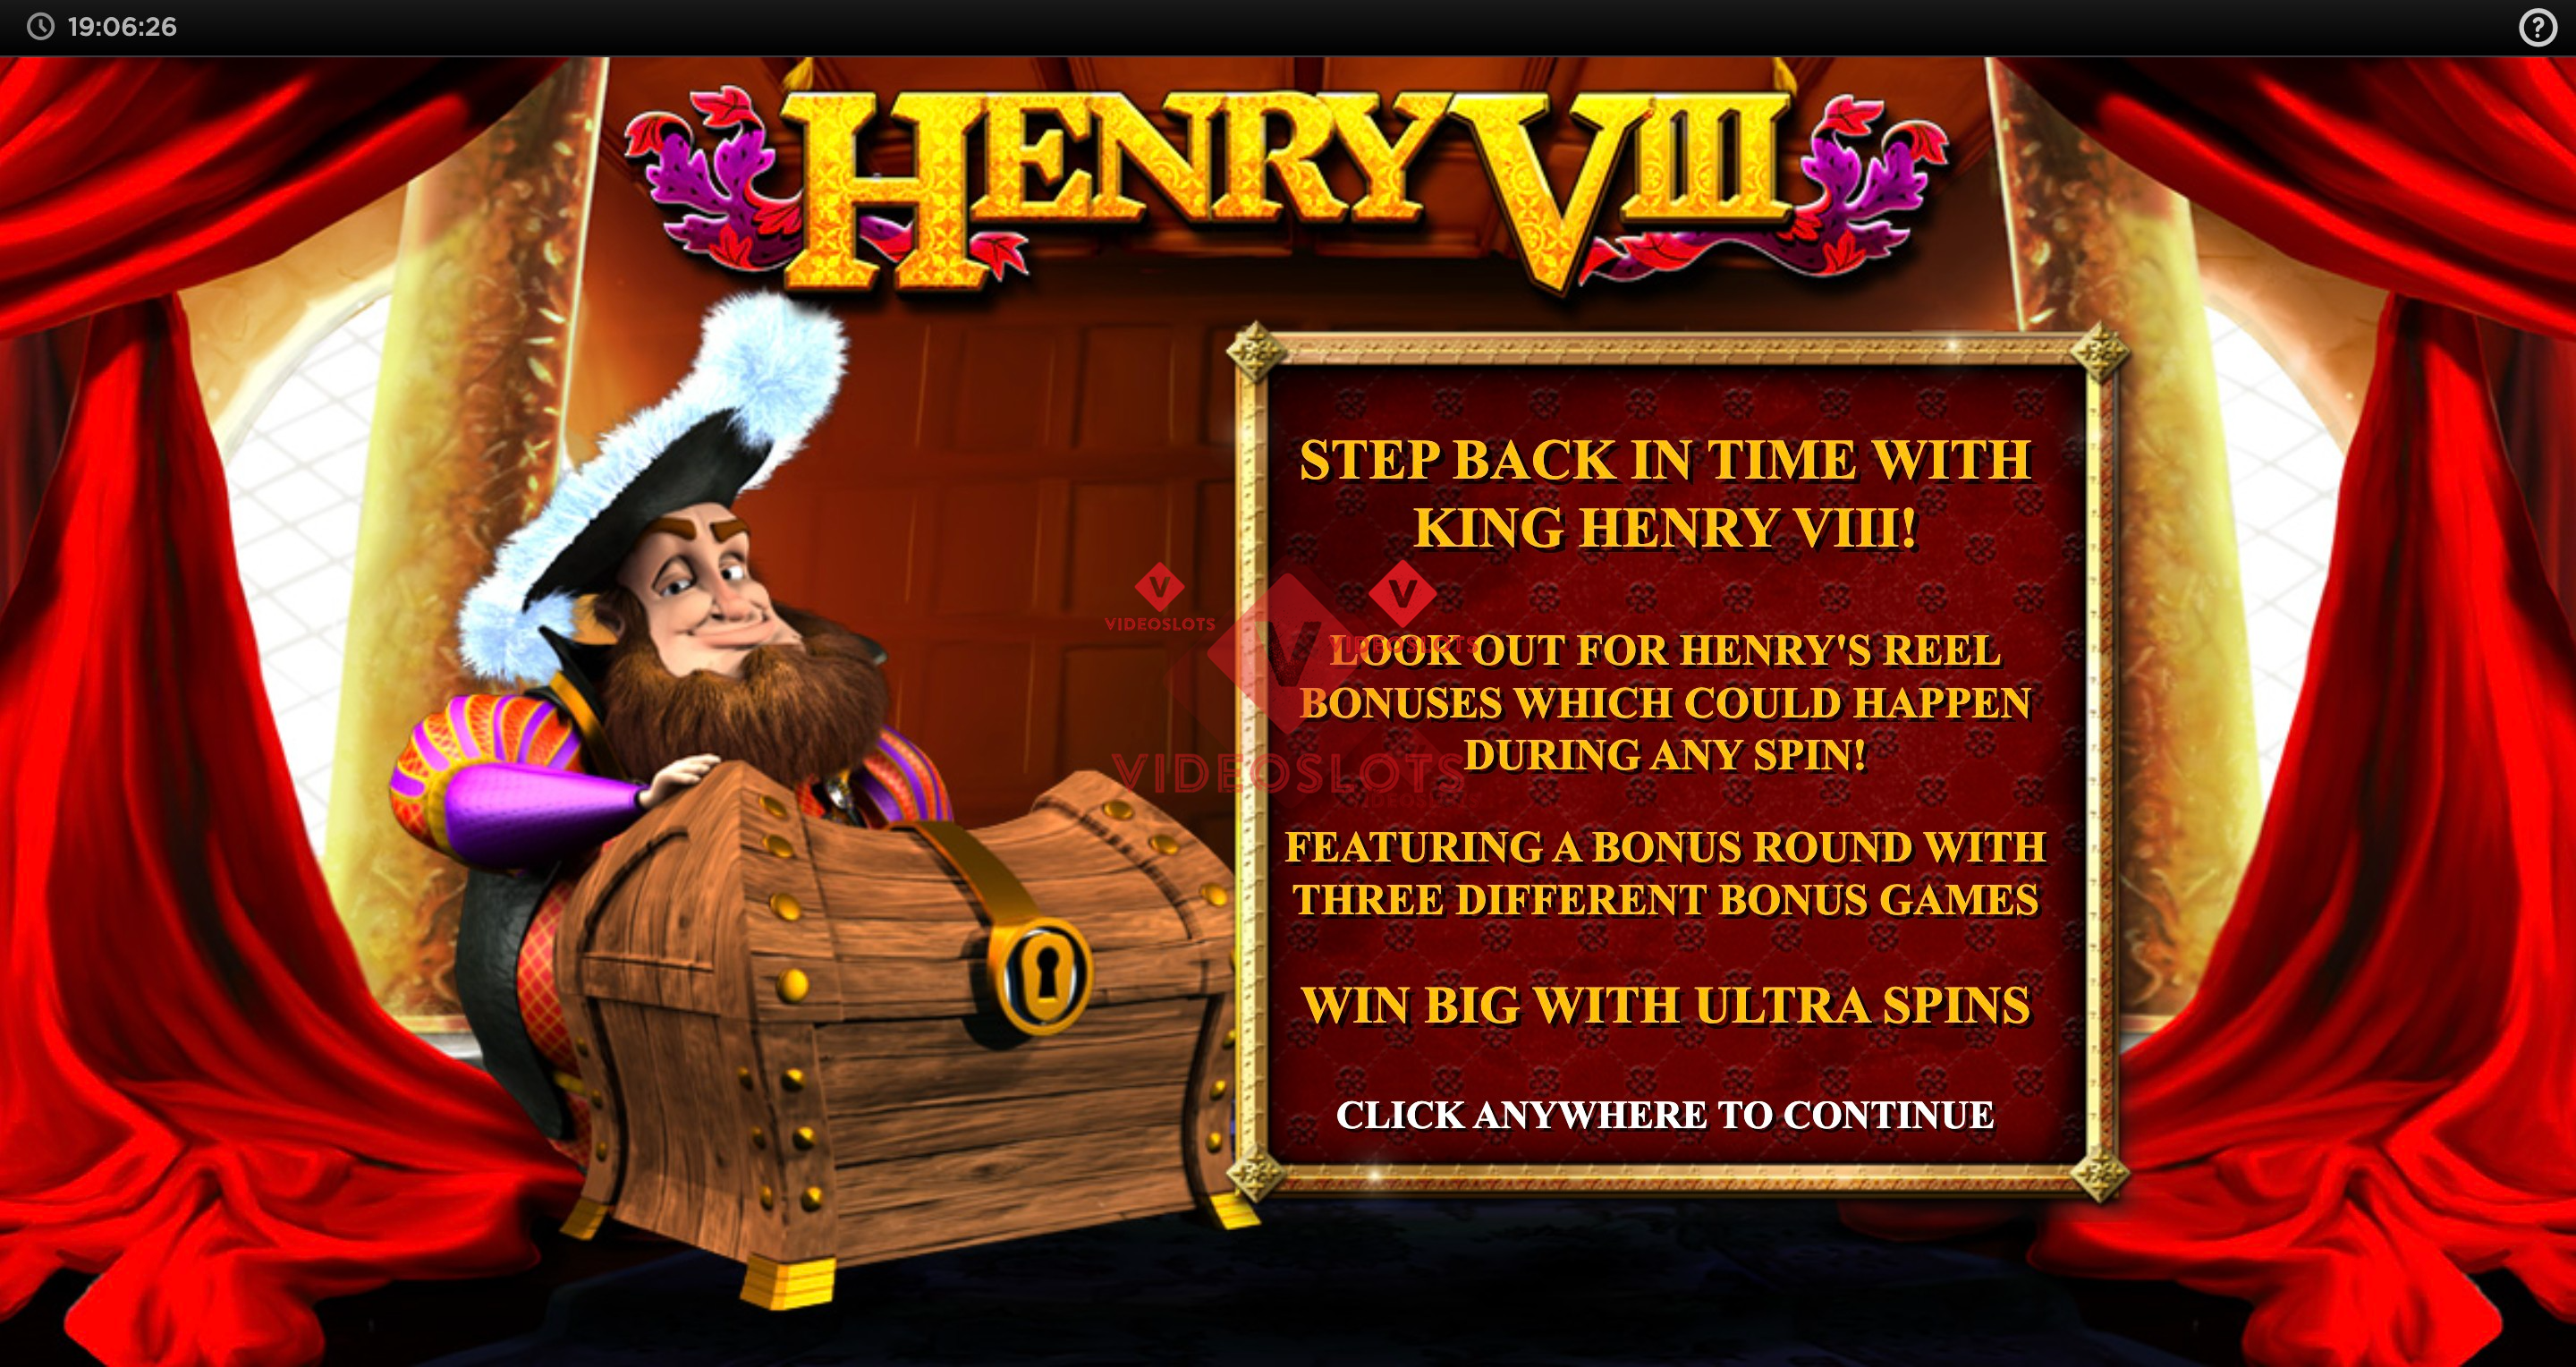 Game Intro for Henry VIII slot from Inspired Gaming